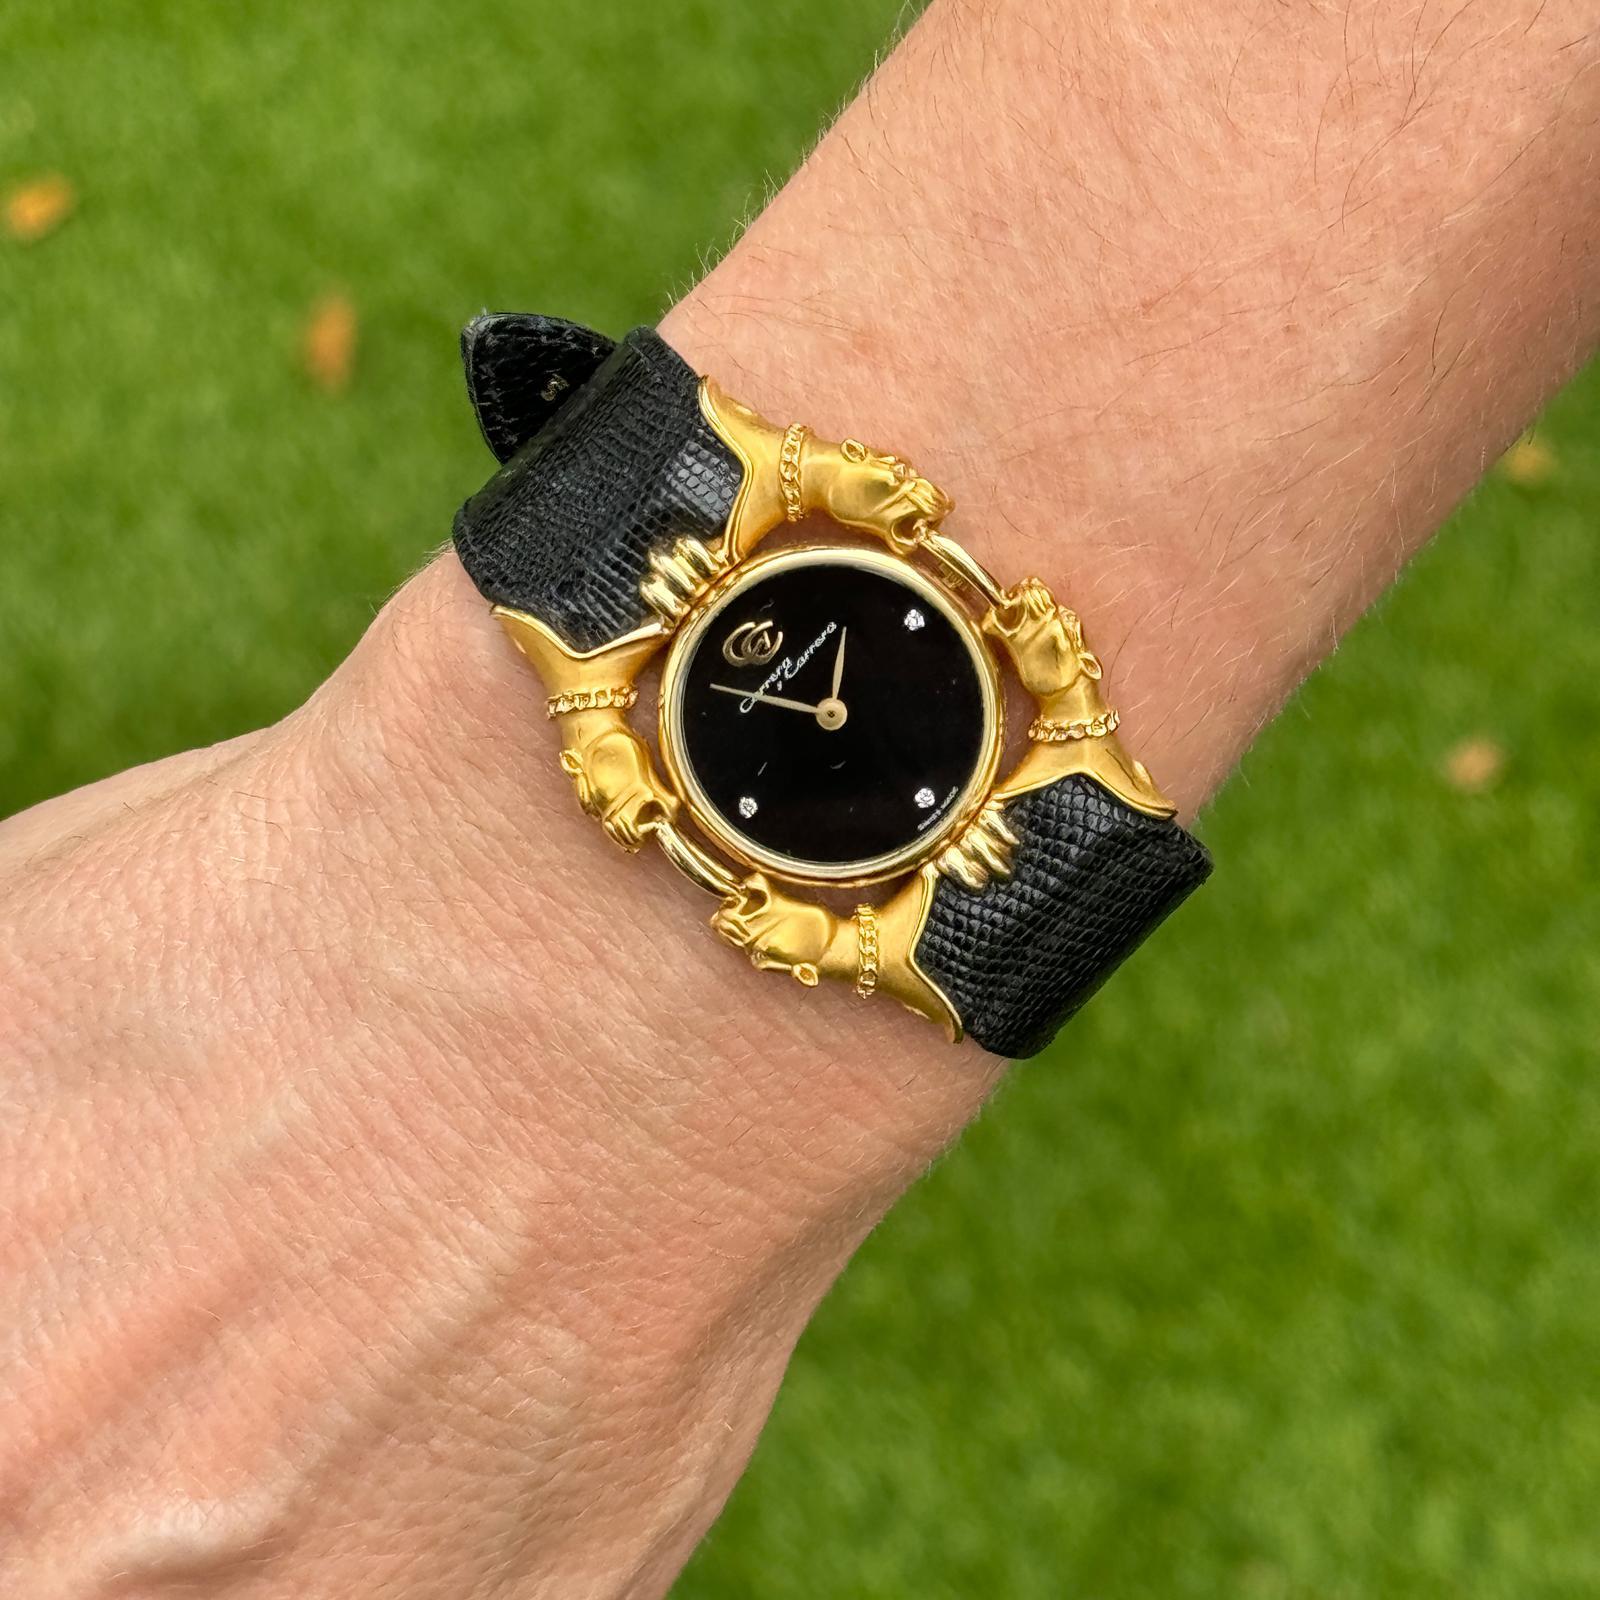 Rare Carrera Y Carrera Panther Head watch crafted in 18 karat yellow gold.The panter's make up the bezel of the watch which has a black diamond dial and original black strap. Quartz movement, numbered. The case measures 30mm in width, 8 inch strap.